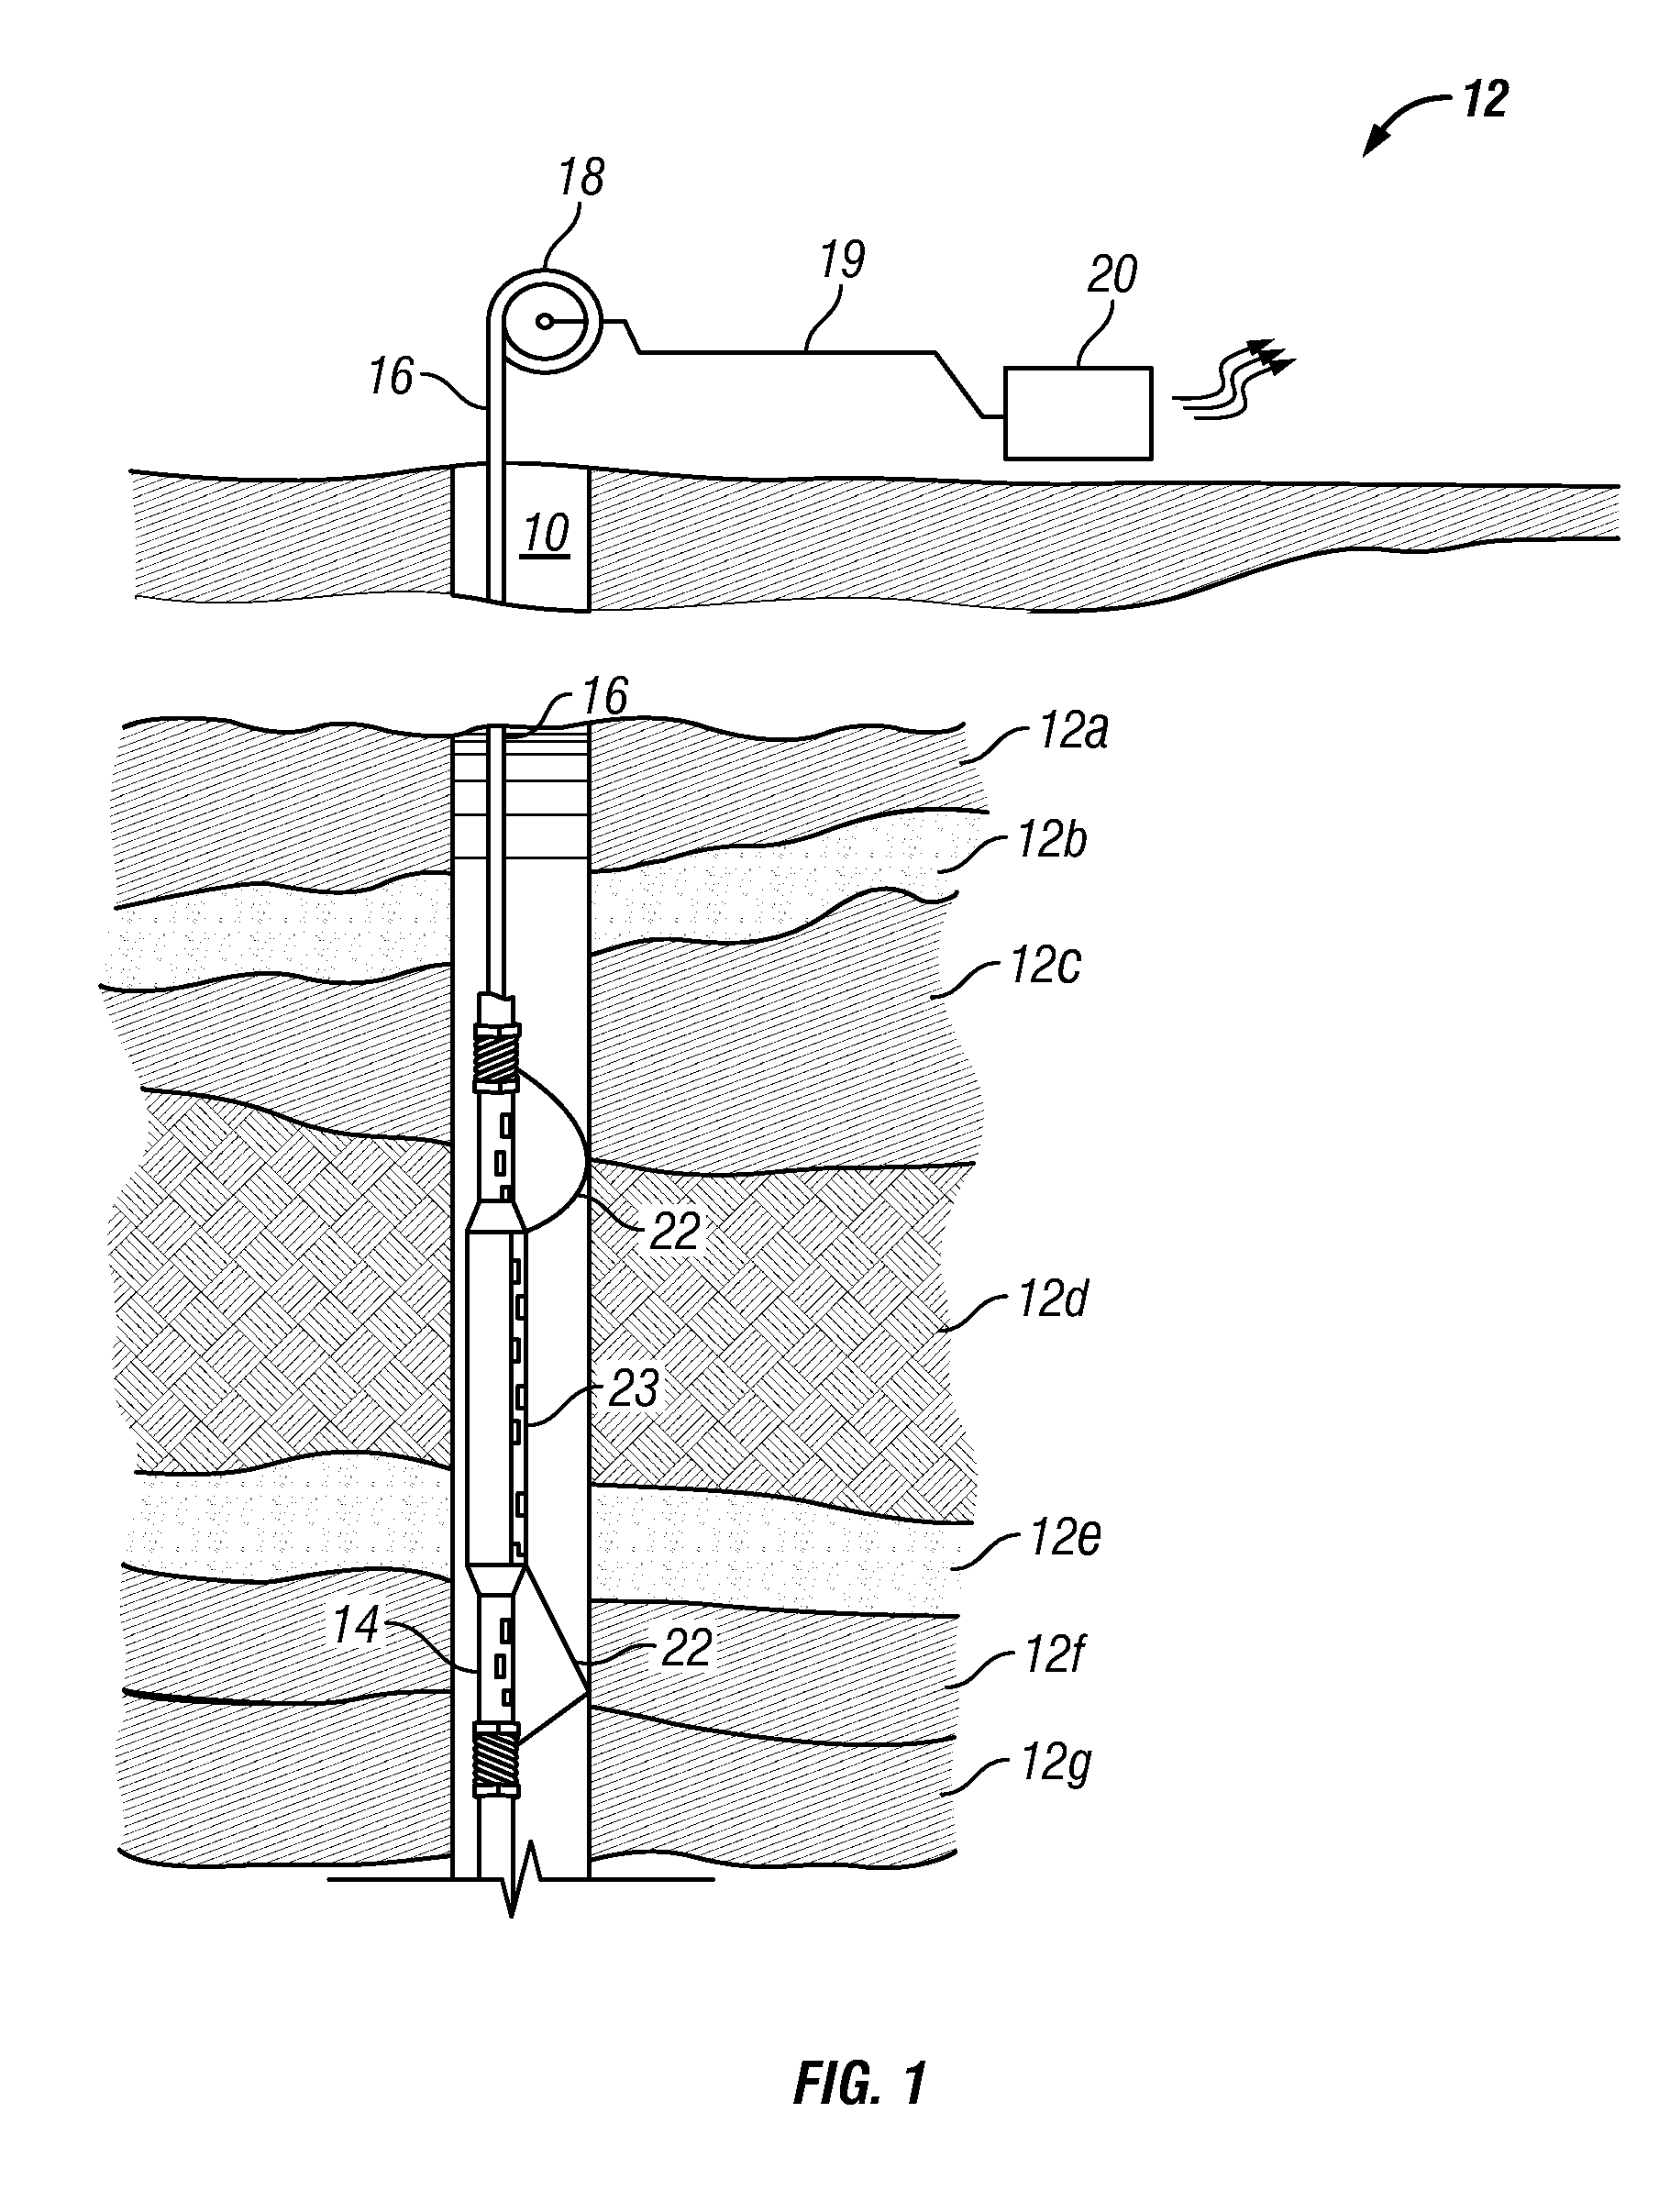 Method and Apparatus to Incorporate Internal Gradient and Restricted Diffusion in NMR Inversion